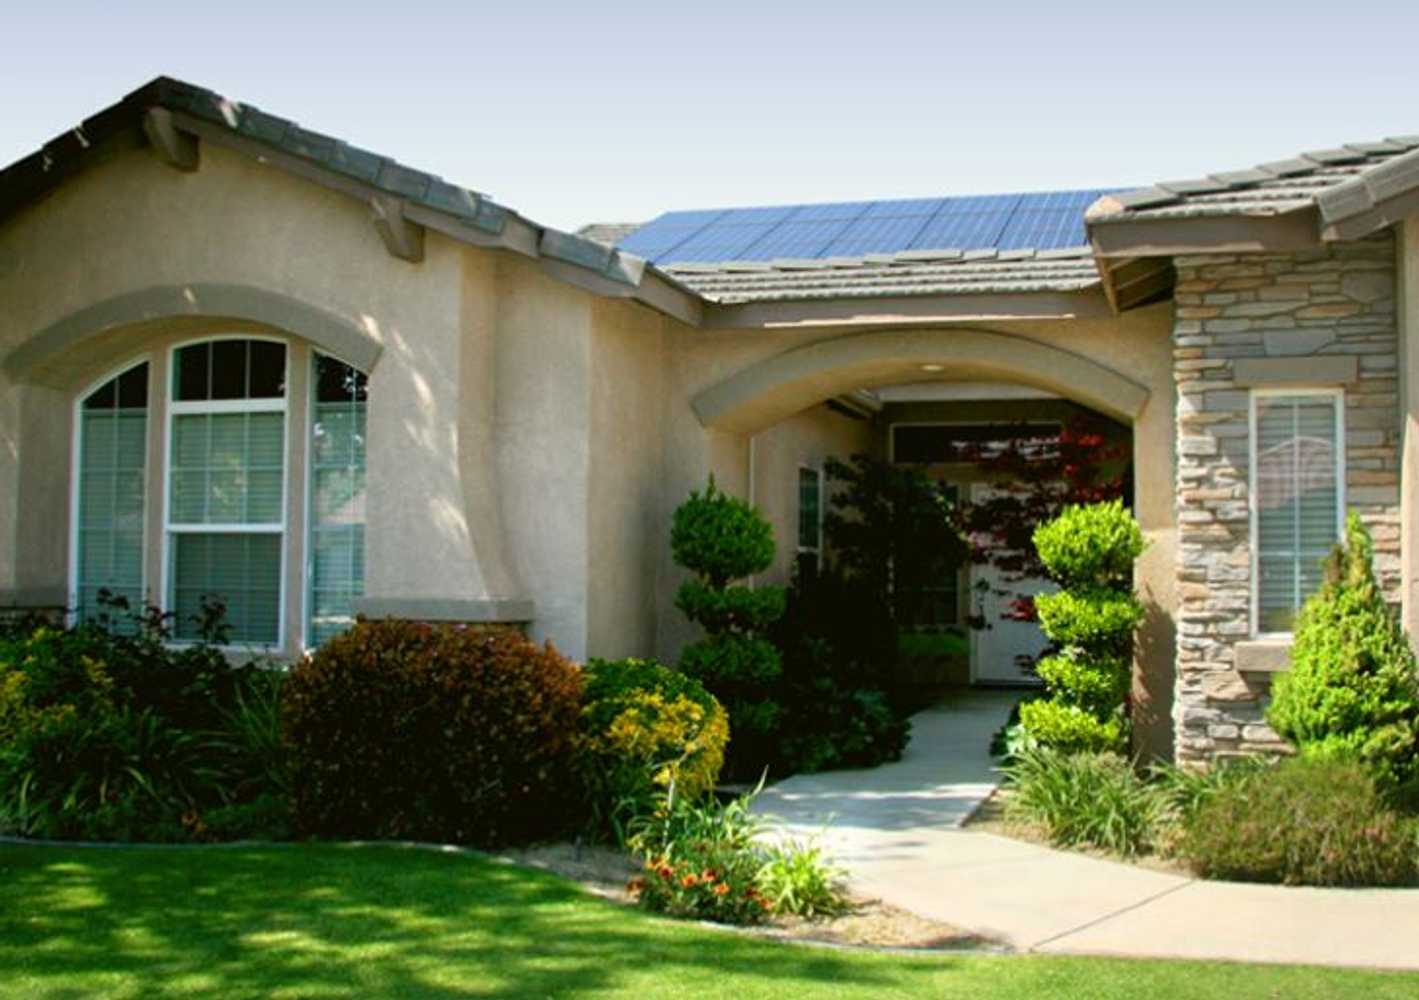 Project photos from Solarcity Corporation